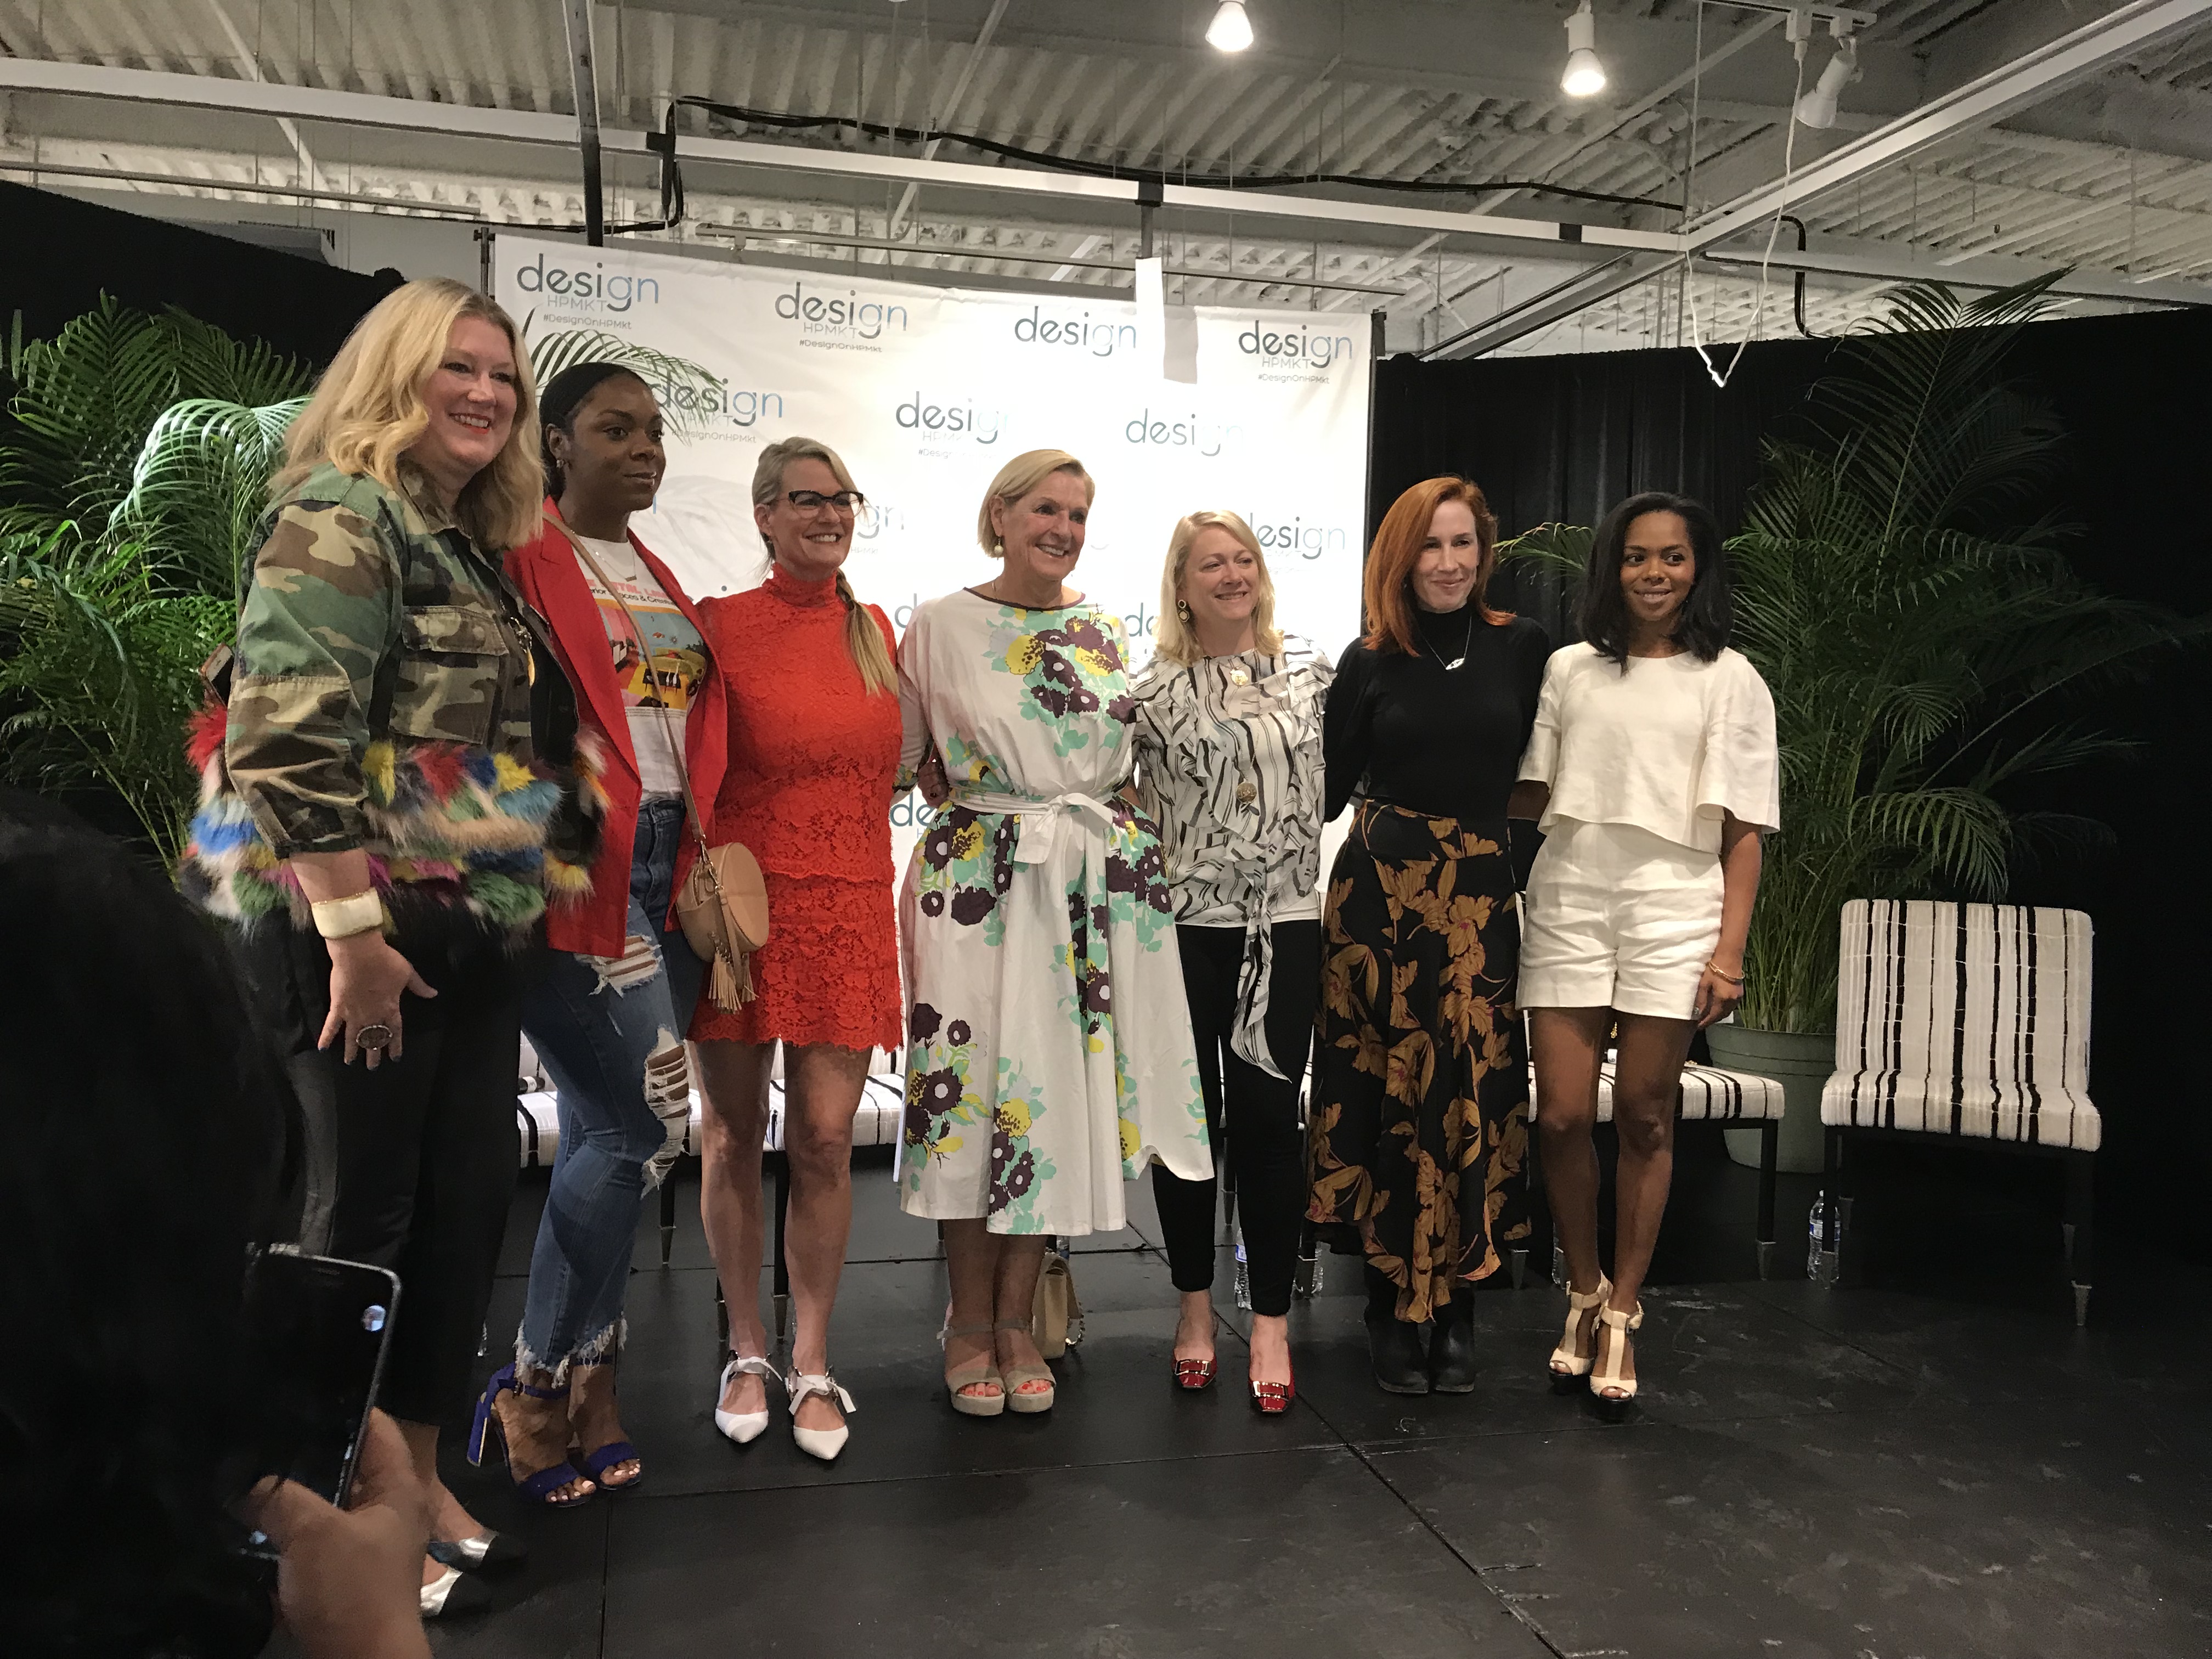 Fearless Design Panel moderated by Holly Hollingsworth Phillips with Mally Skok, Julia Buckingham, Jaimie Meares, Alison Mattison, Tavia Forbes and Monet Masters